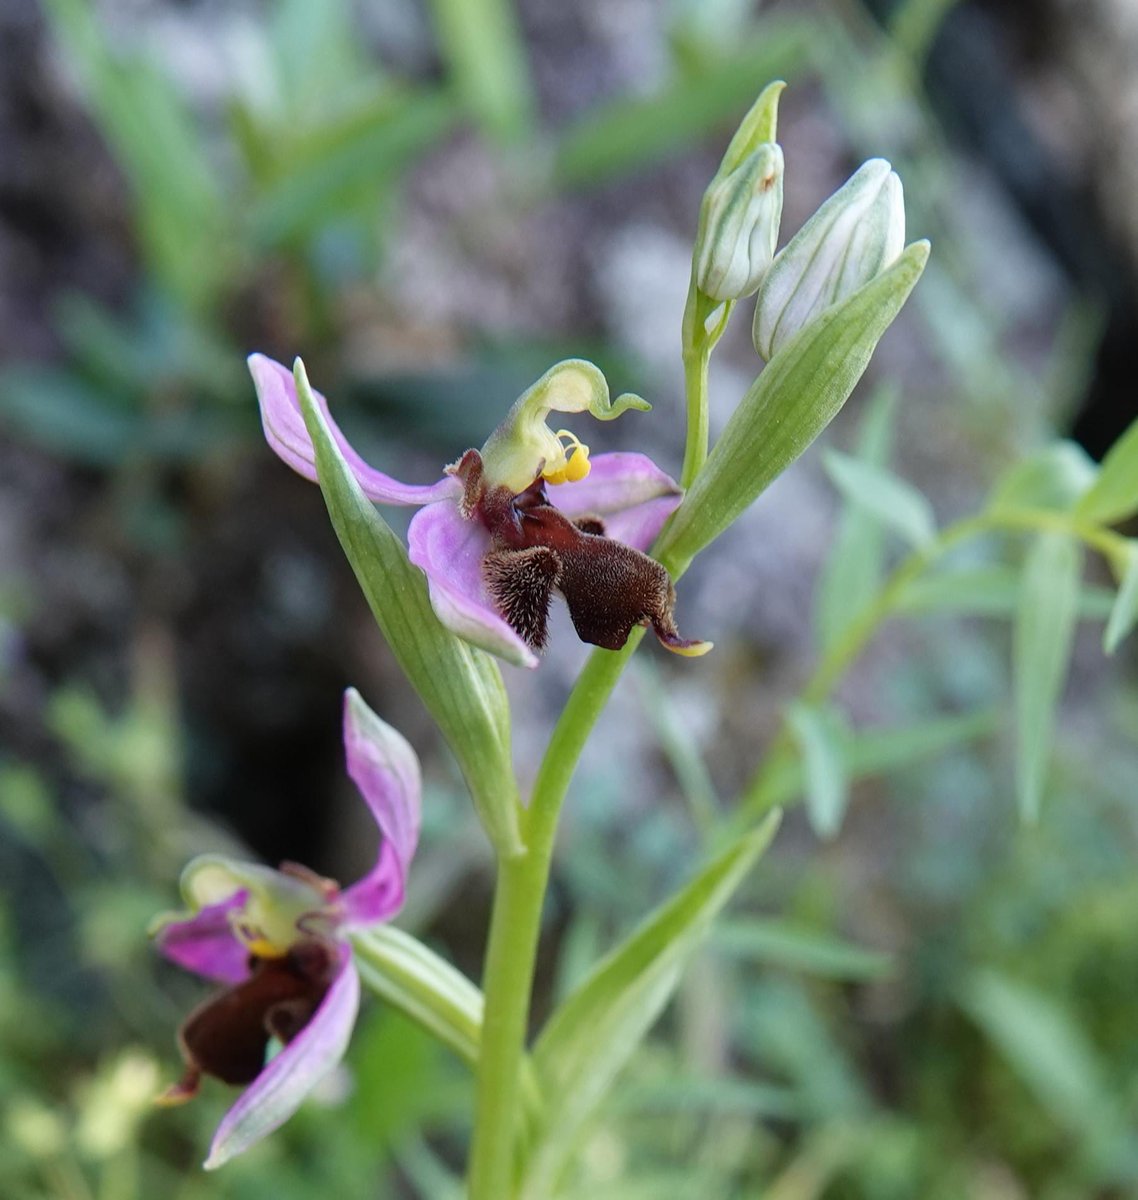 The very latest Ophrys (bee orchid genus) to flower in #Extremadura each spring is the Common Bee #Orchid (Ophrys apifera) and a highly localised variant, the 'Almaráz' Bee Orchid (Ophrys apifera var.almaracensis).